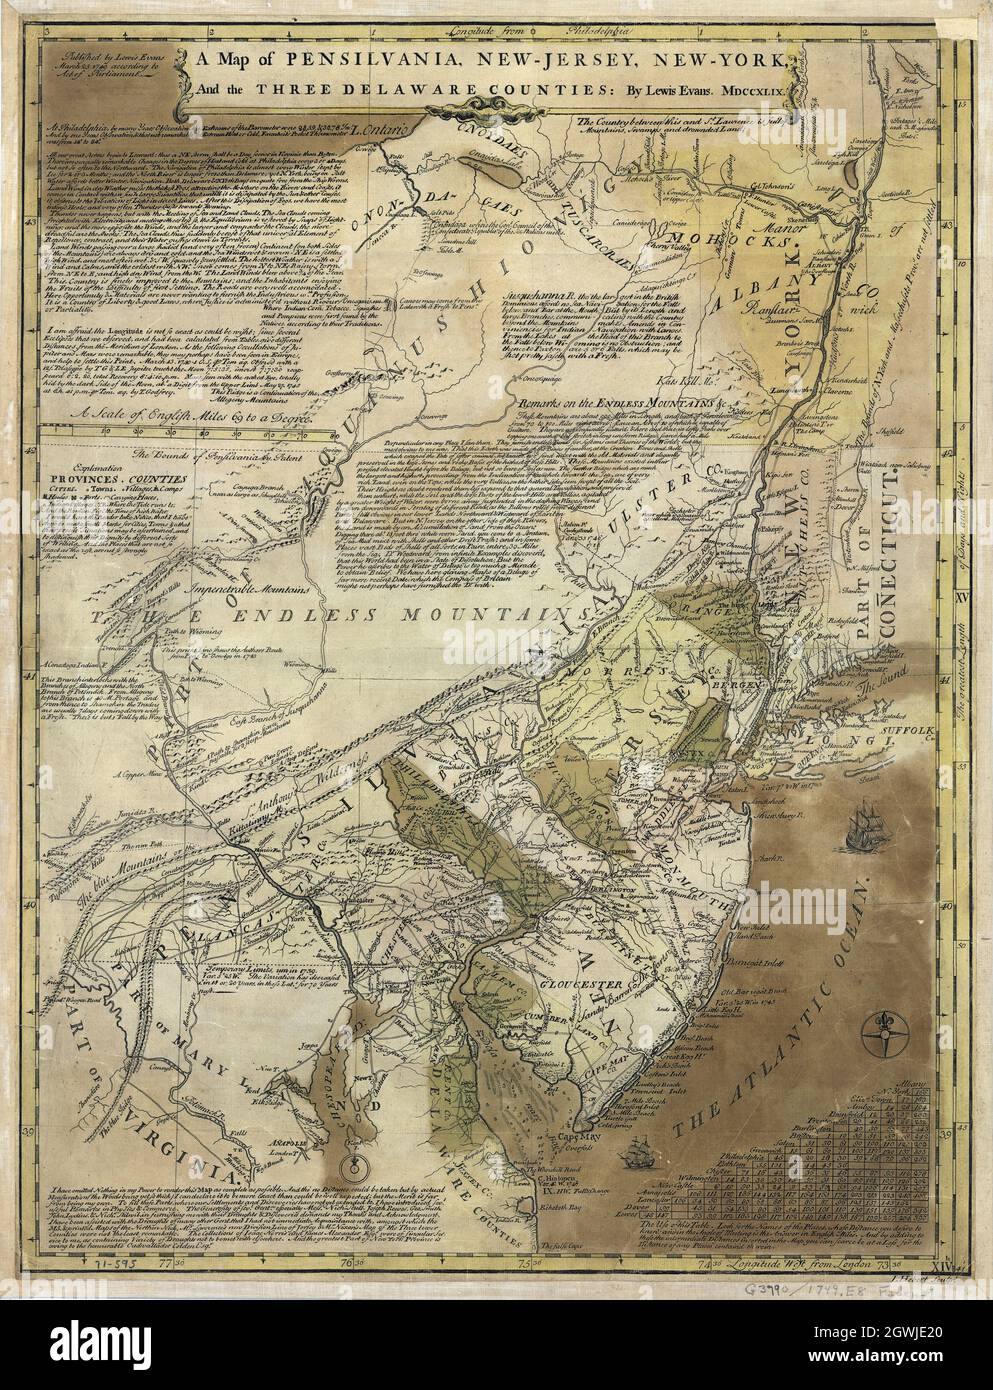 A map of Pensilvania, New-Jersey, New-York, and the three Delaware counties. Created / Published, Philadelphia 1749. Stock Photo